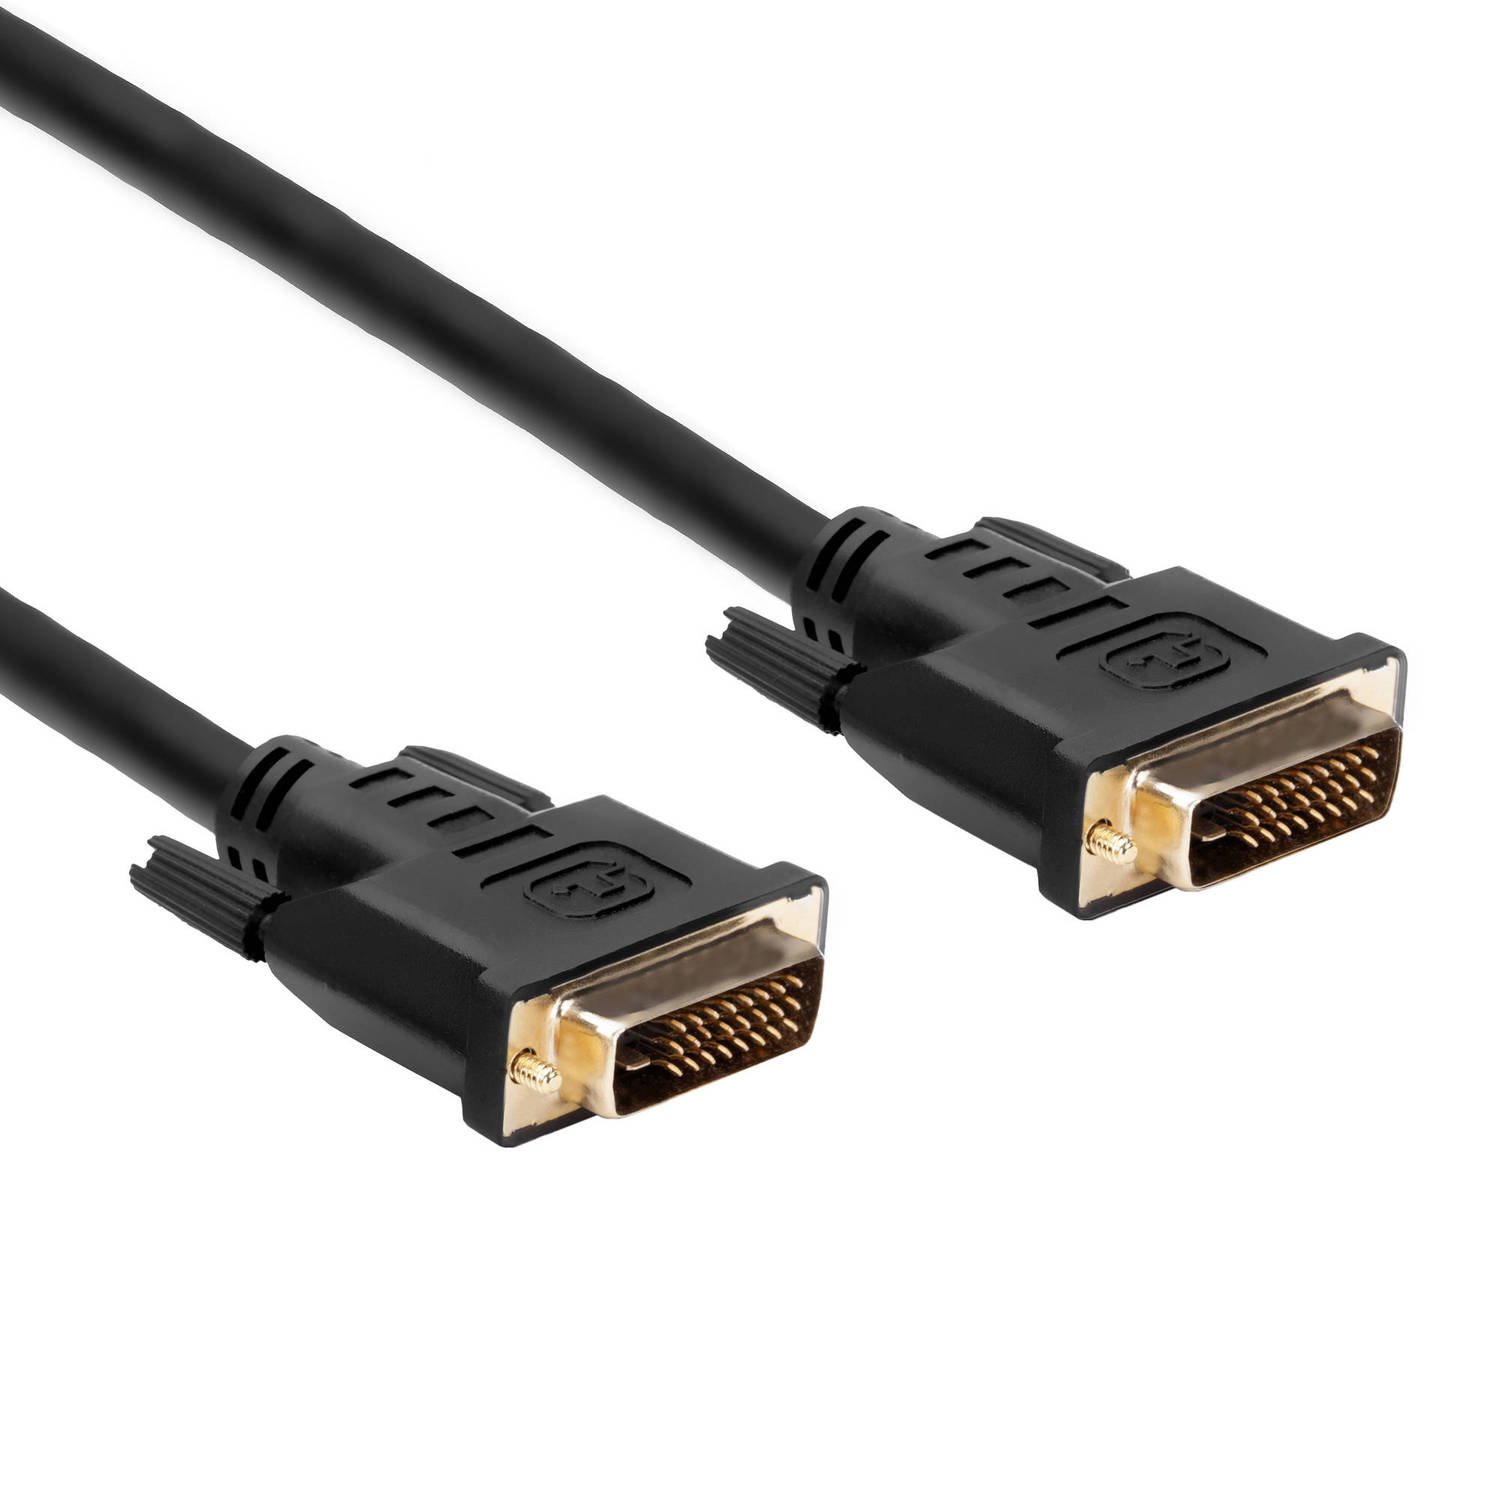 Cable Pearstone Dvi D Dual Link 6